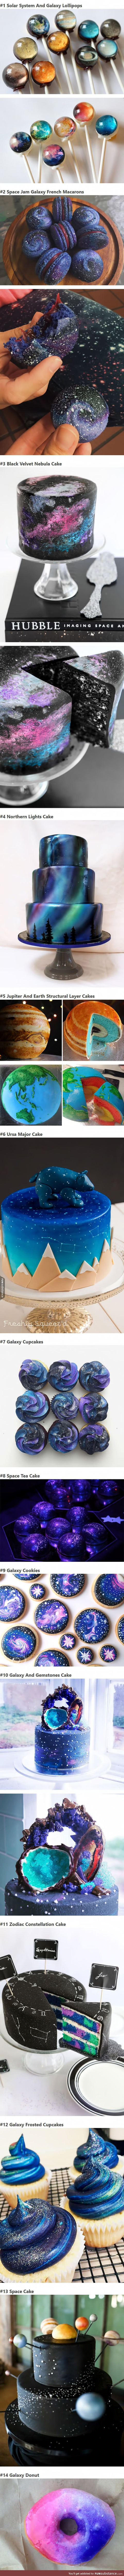 14 Galaxy Inspired Desserts And Sweets That Are Out Of This World